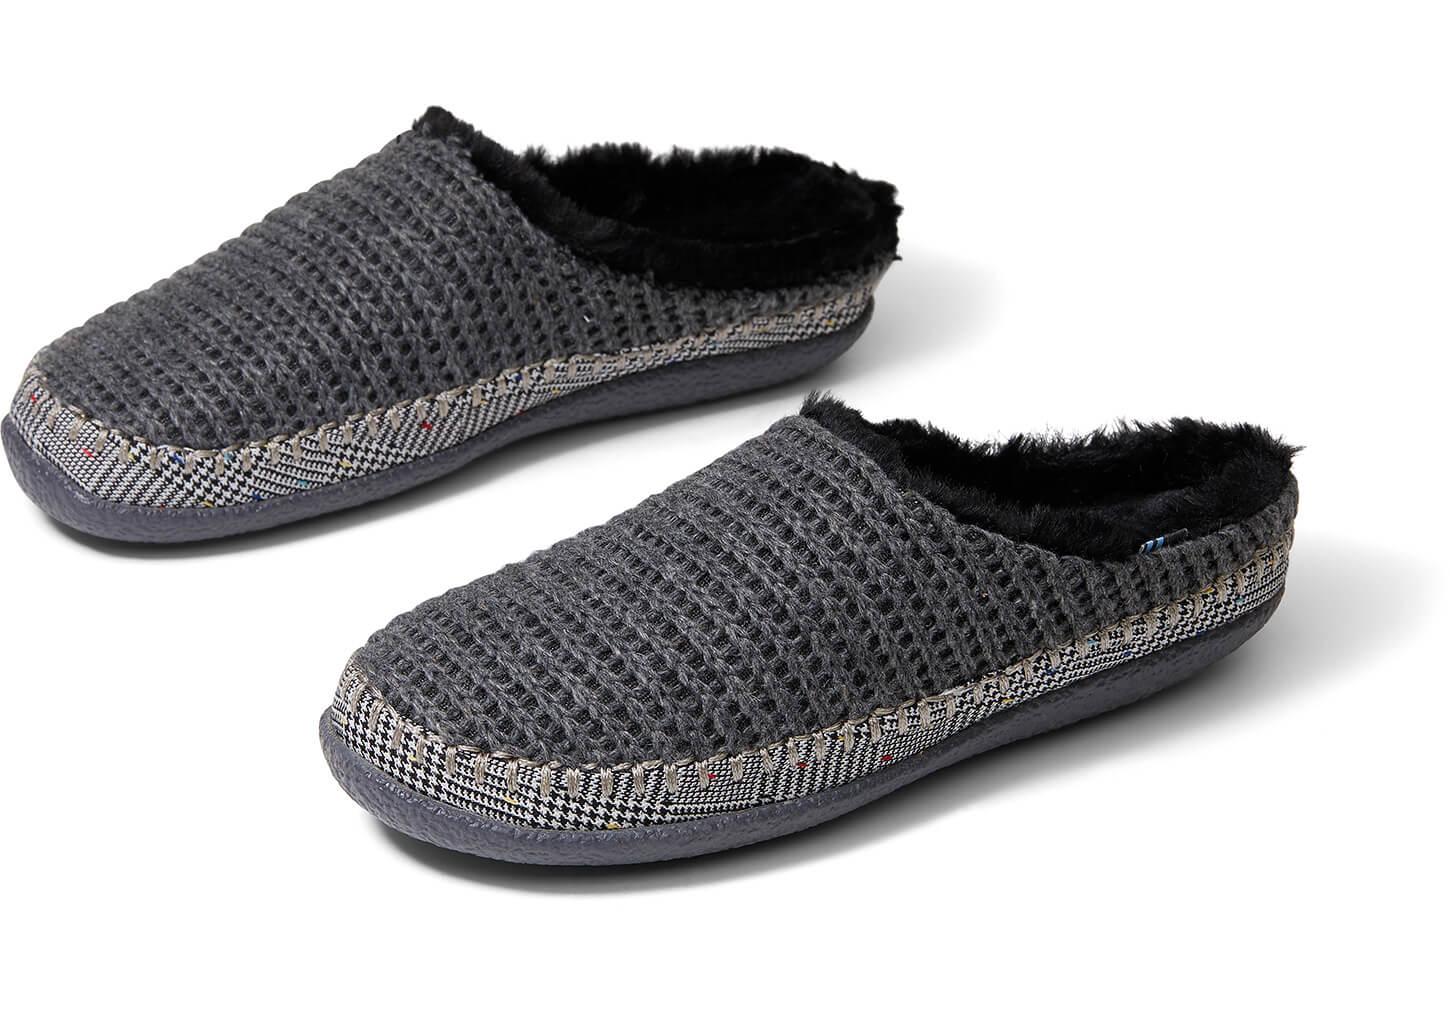 black and white sweater knit women's ivy slippers